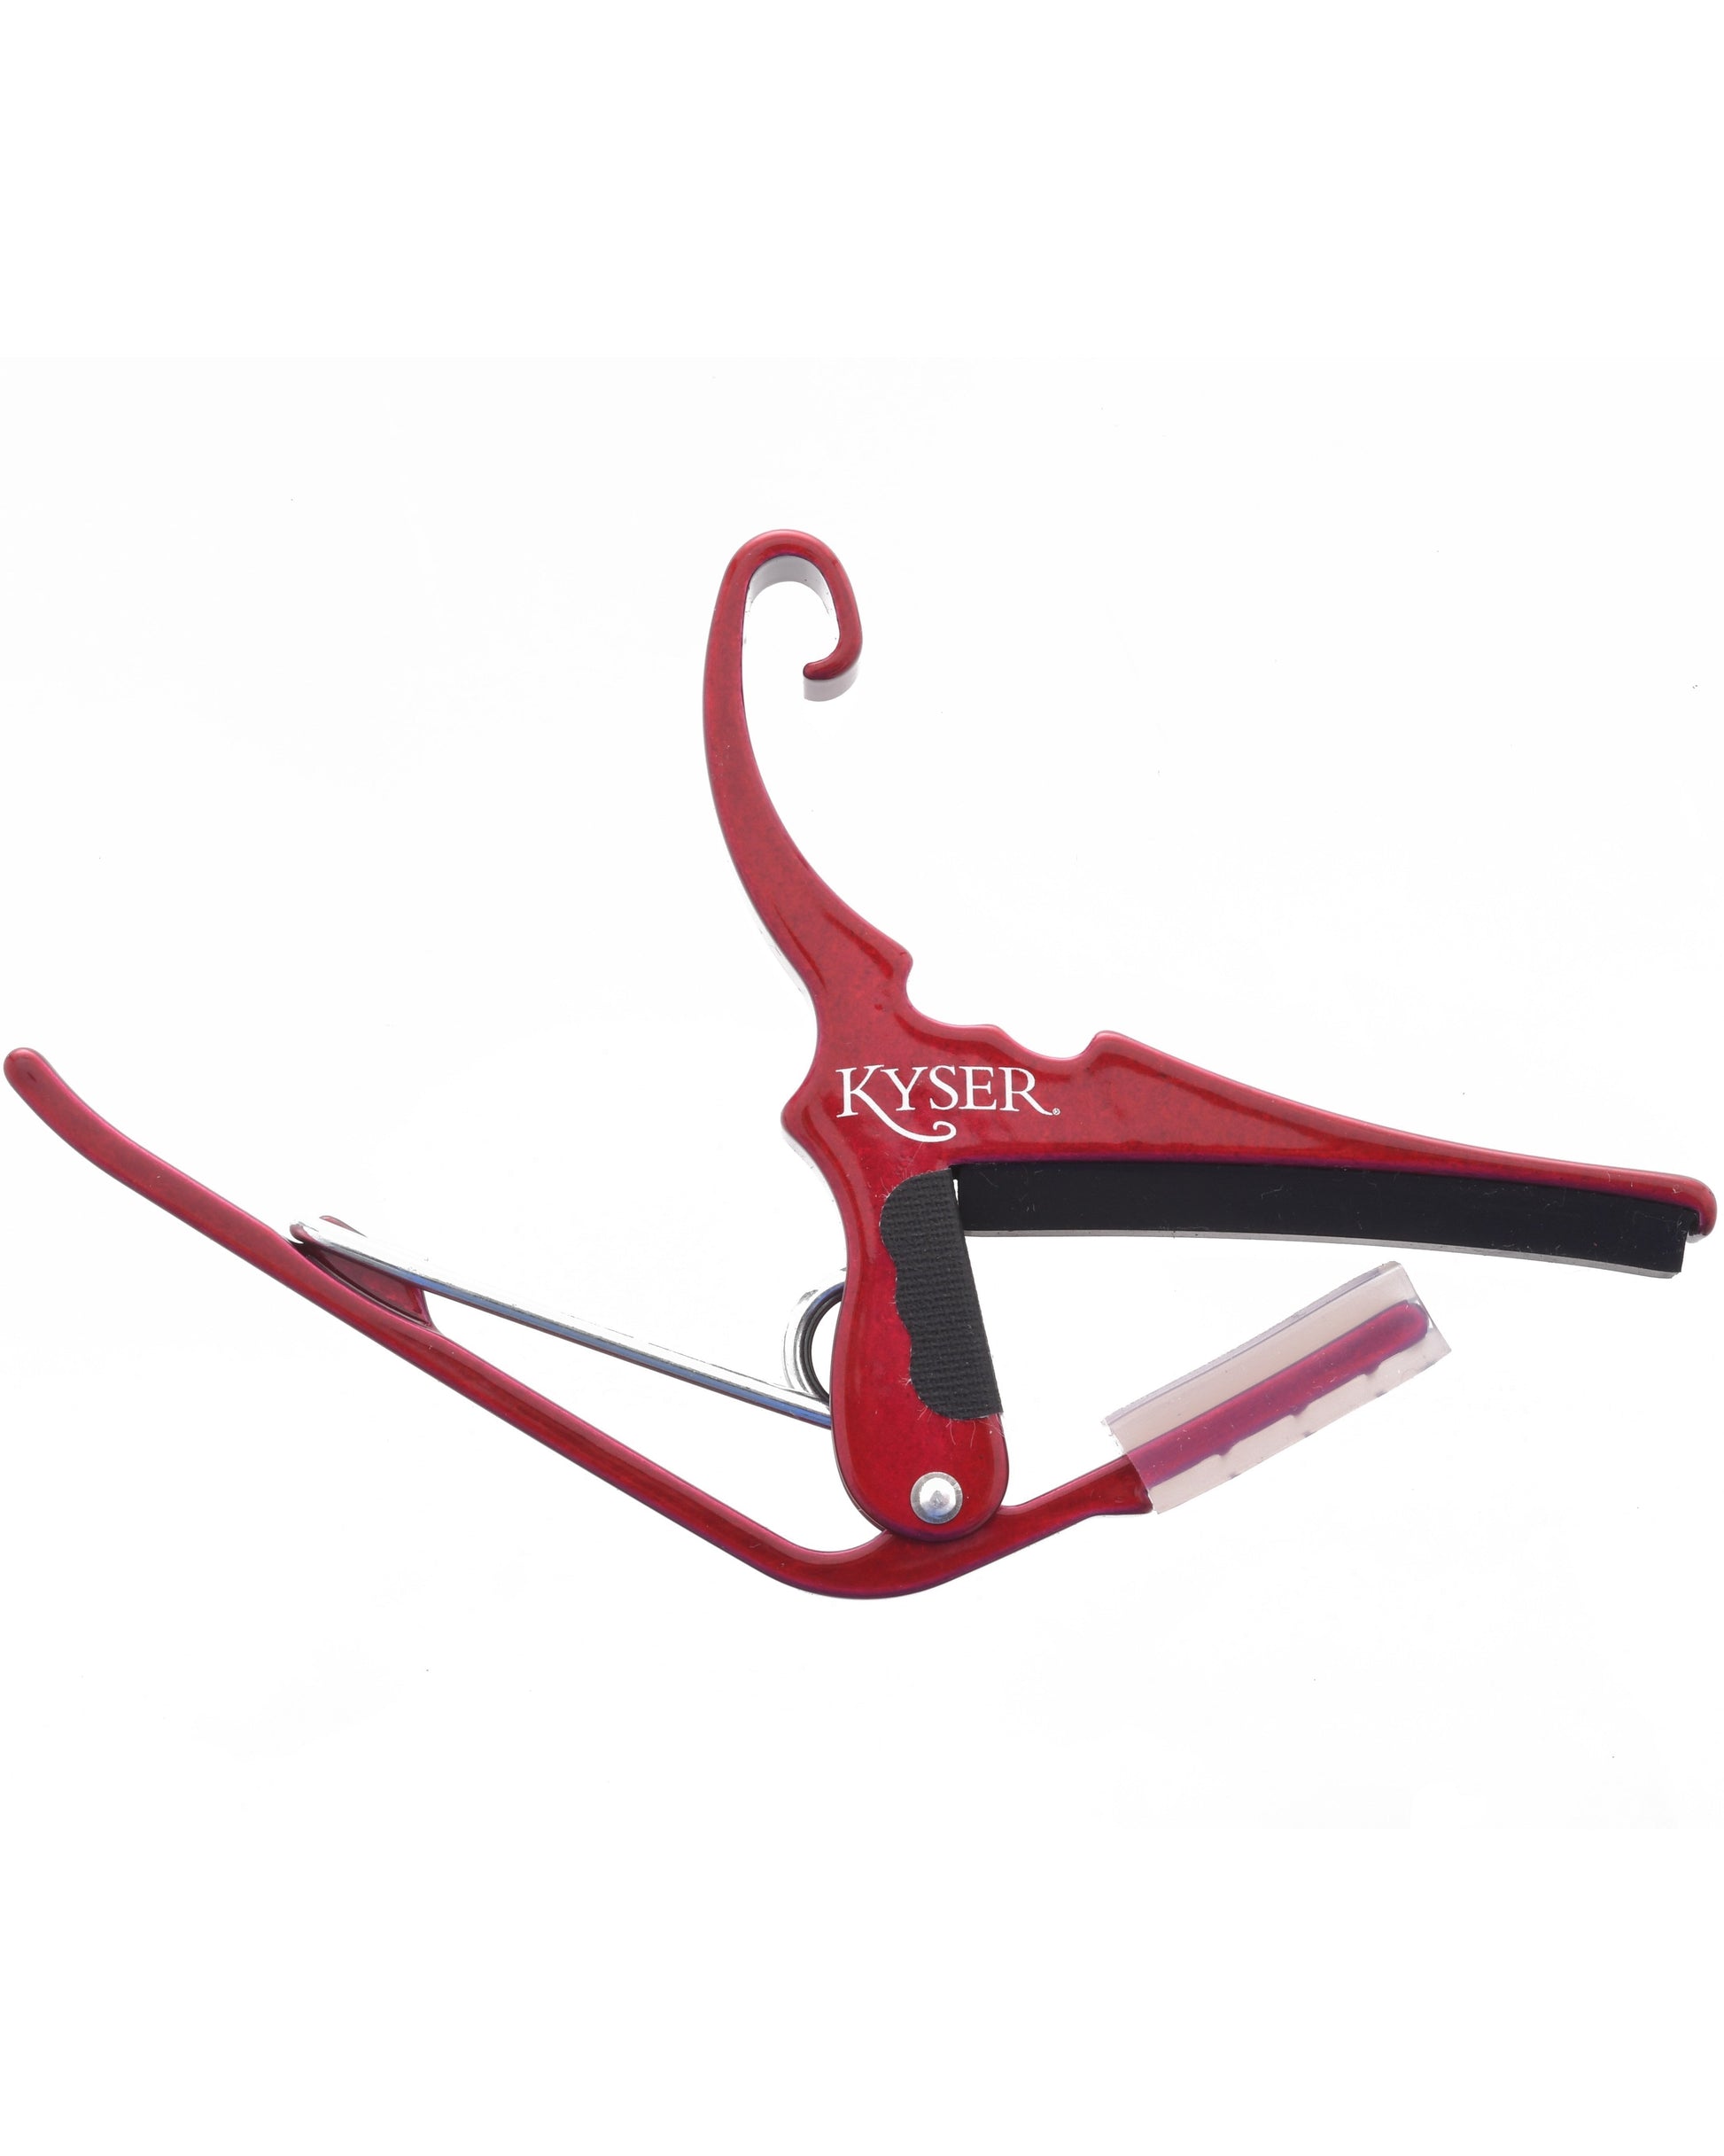 Image 1 of Kyser Quick Change Guitar Capo - SKU# KGC1-RED : Product Type Accessories & Parts : Elderly Instruments